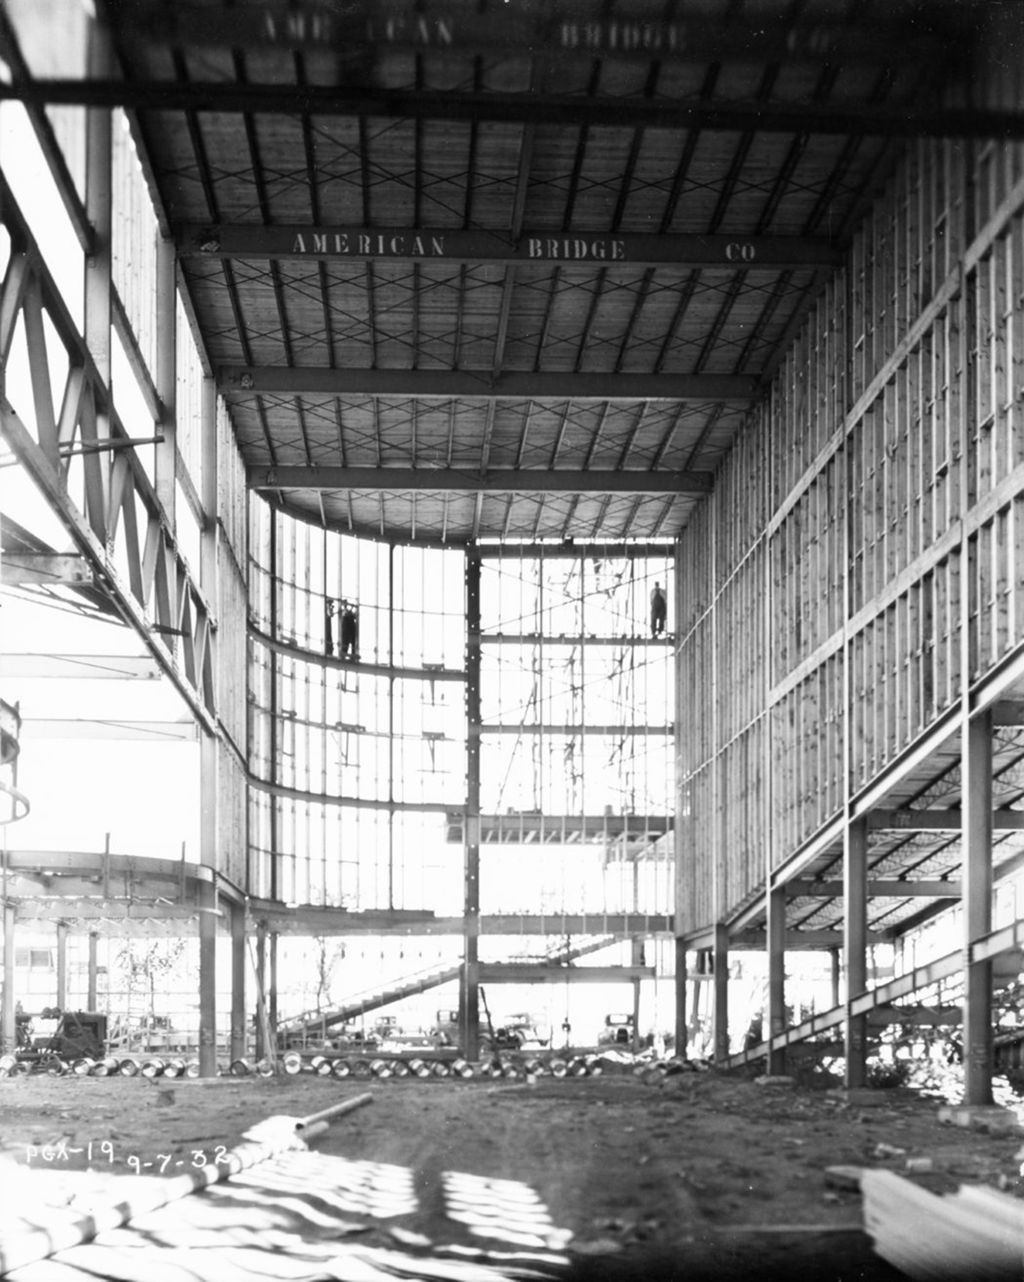 Construction of the General Exhibits building